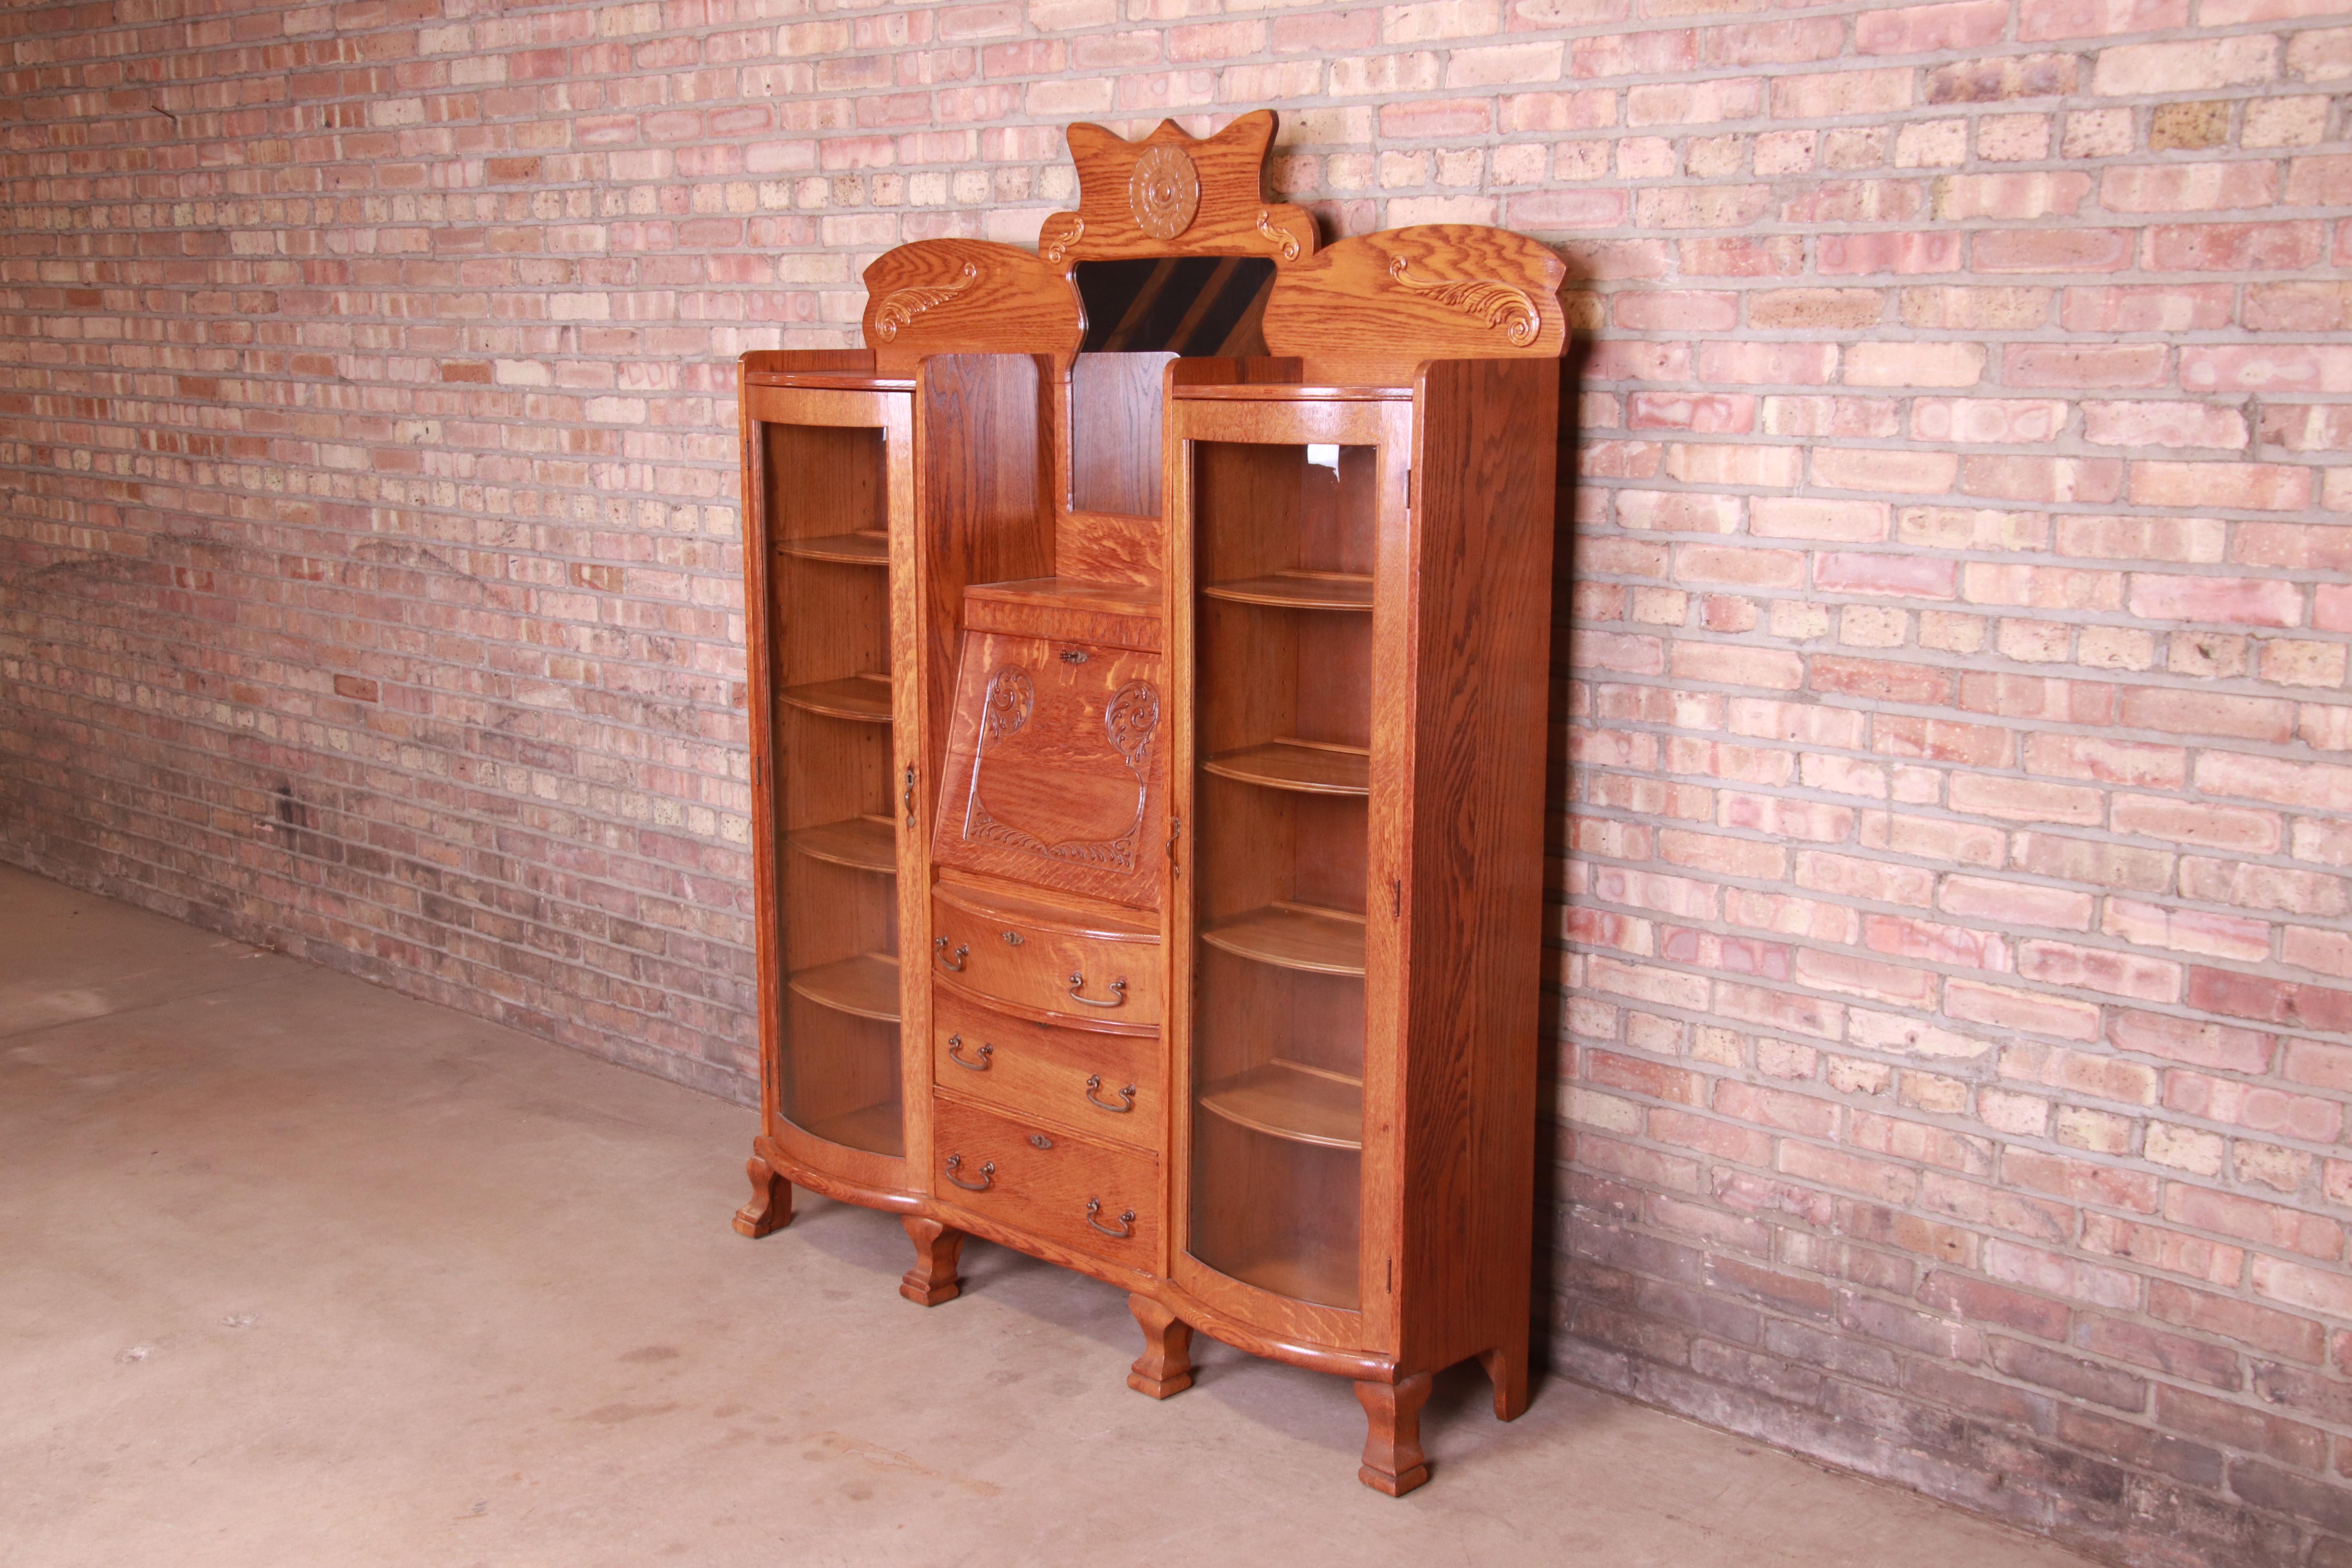 A gorgeous antique Victorian double bookcase wall unit with drop down secretary desk and mirror

USA, Circa 1890s

Carved solid oak, with curved glass doors and original brass hardware. All drawers and doors lock, and original key is